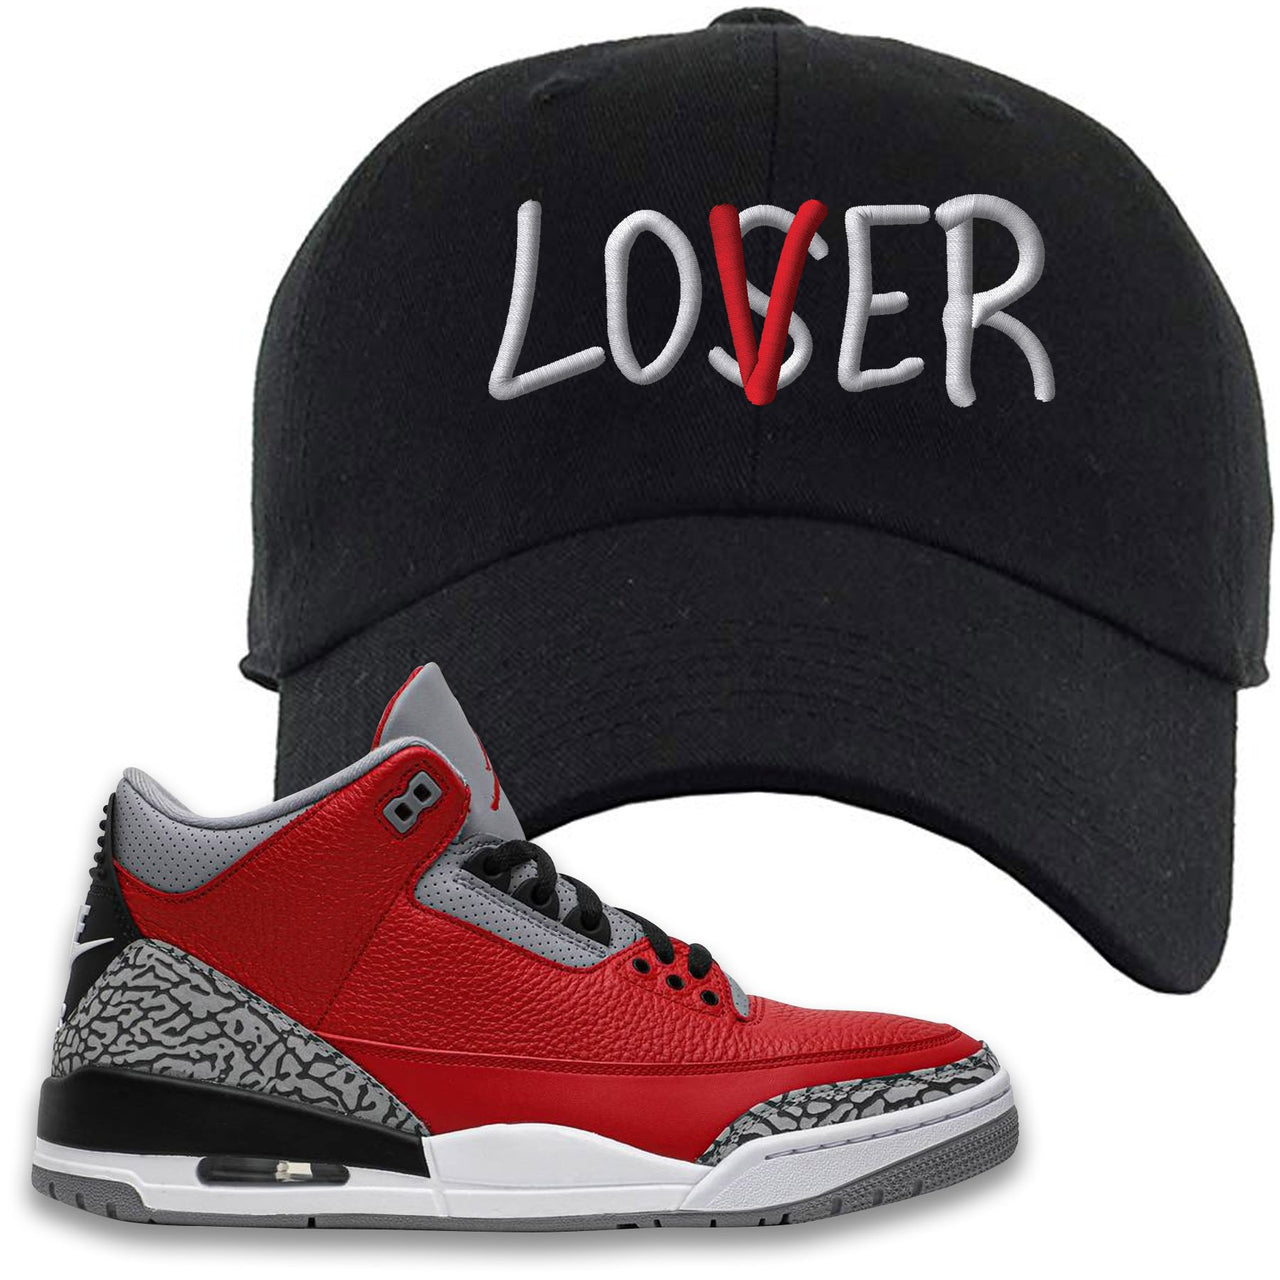 Chicago Exclusive Jordan 3 Red Cement Sneaker Black Dad Hat | Hat to match Jordan 3 All Star Red Cement Shoes | Lover